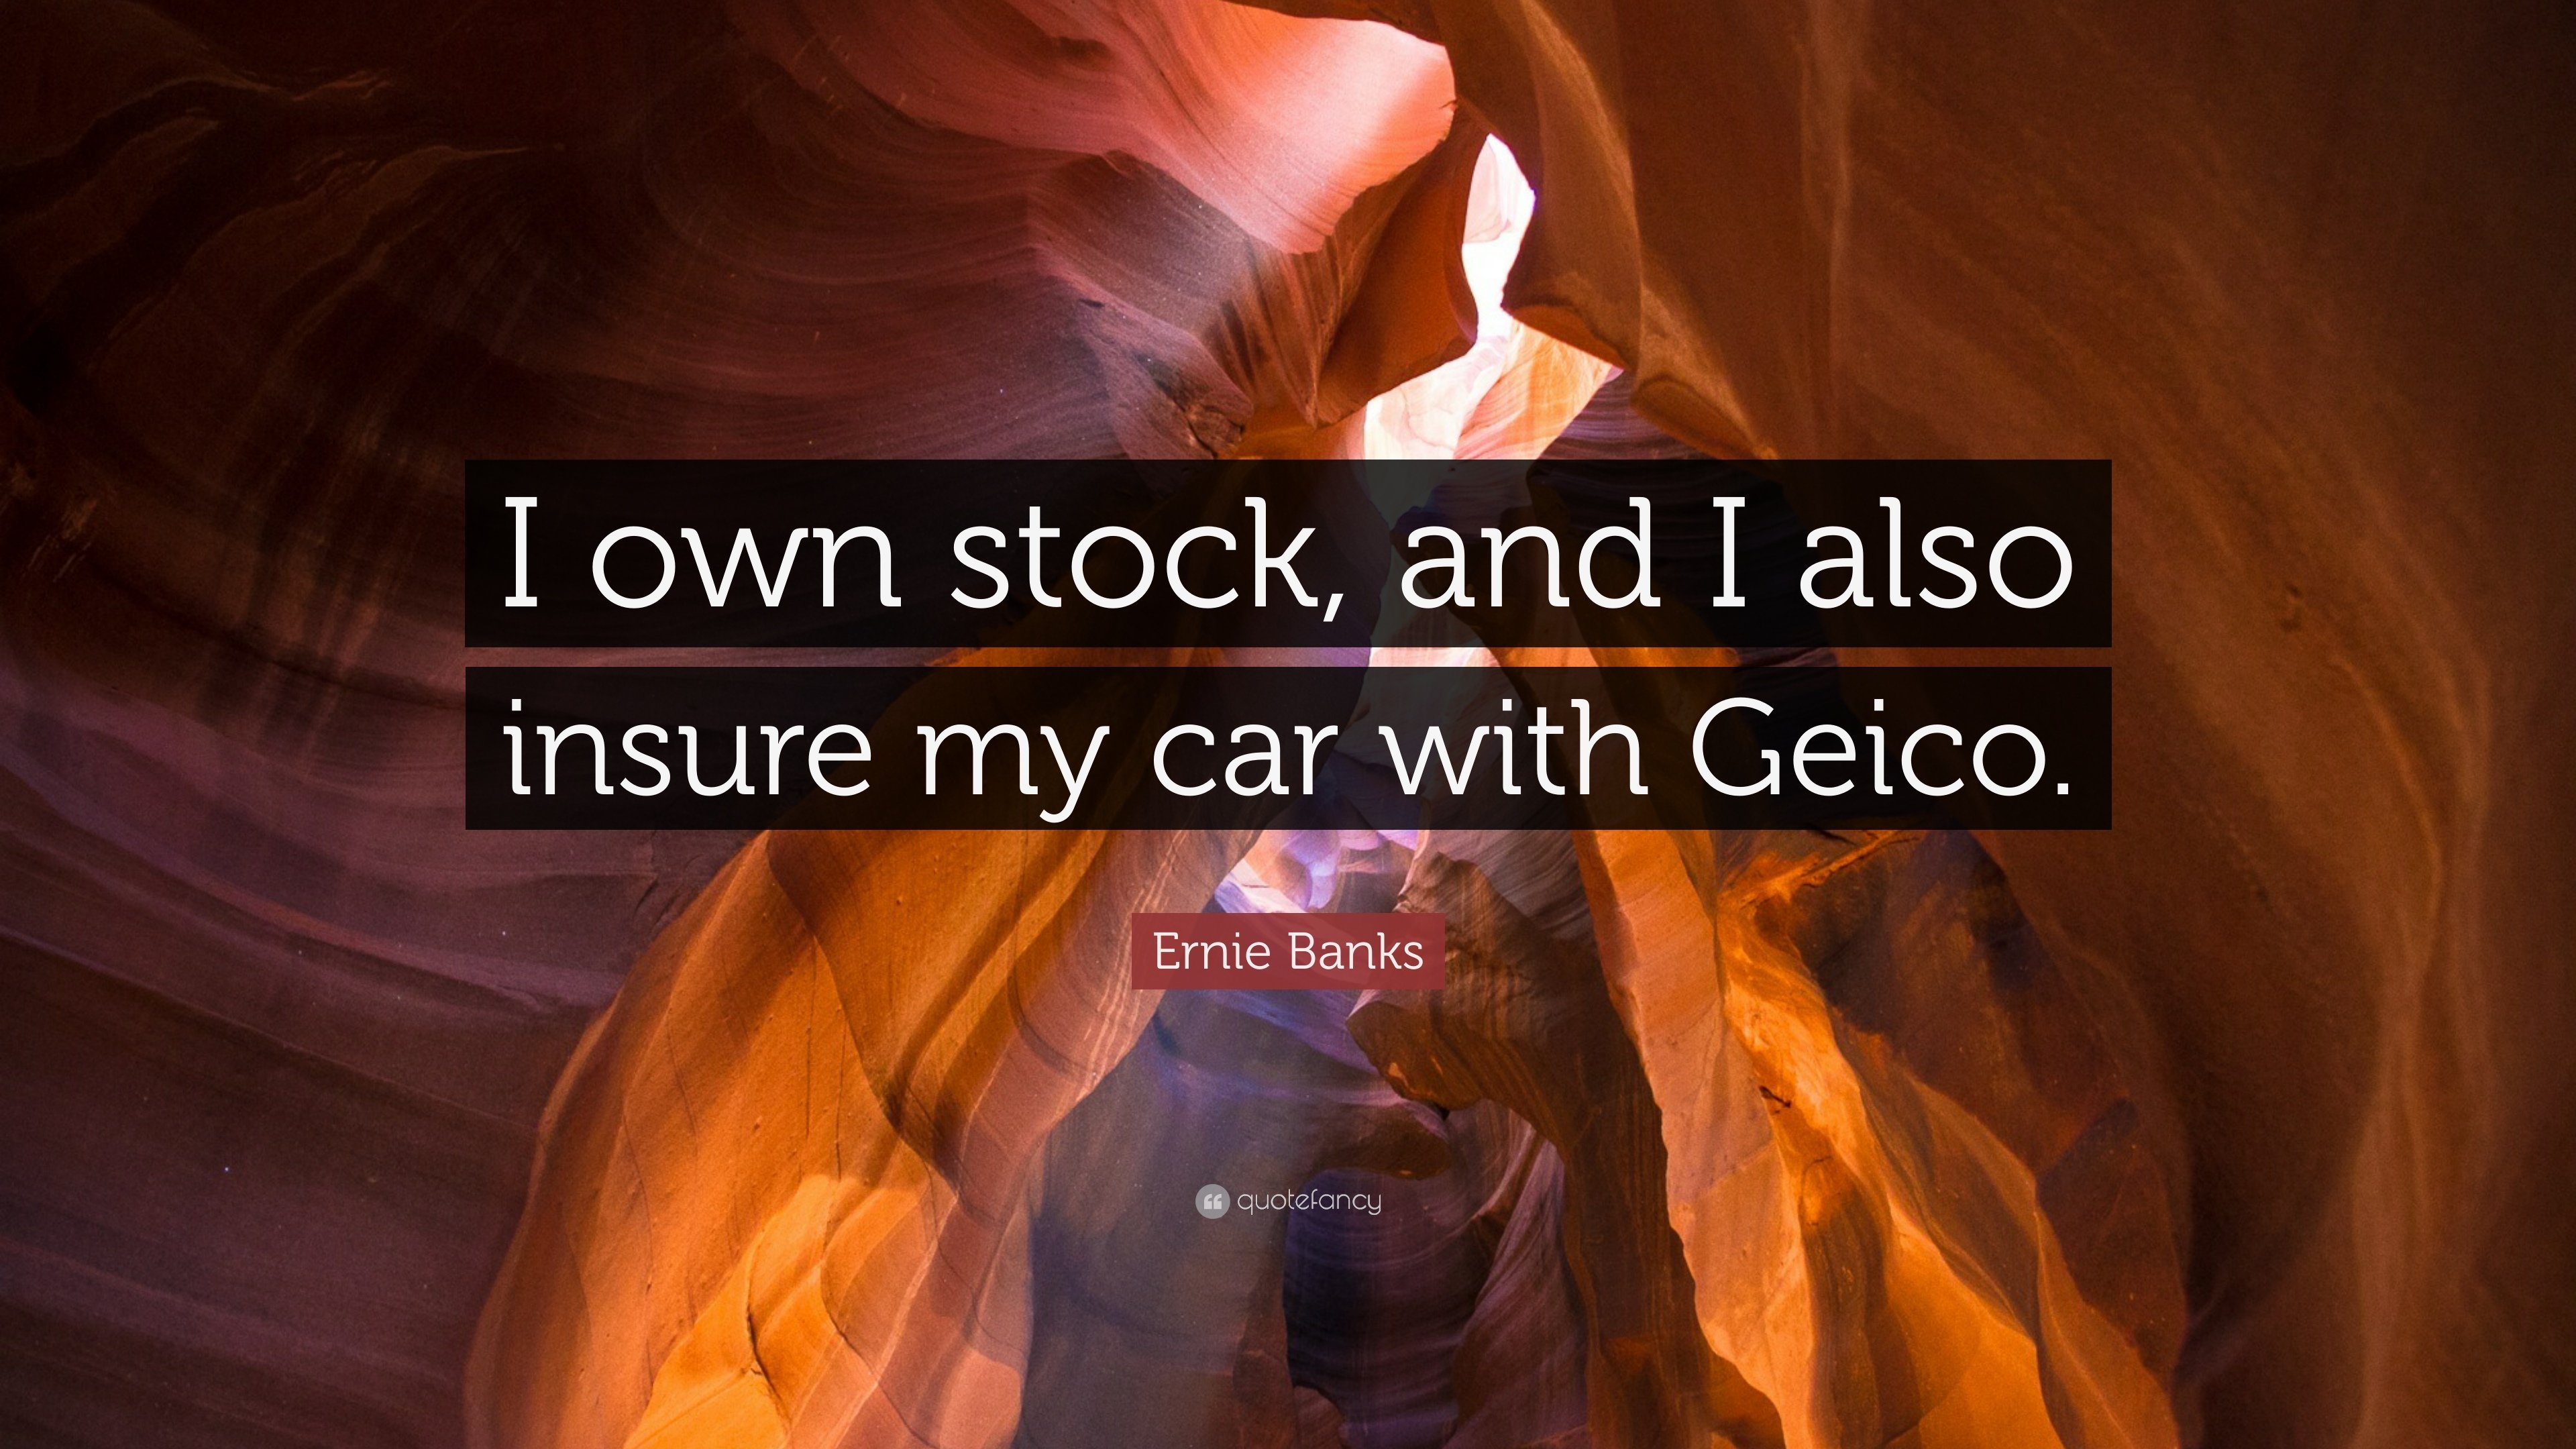 Ernie Banks Quote: “I own stock, and I also insure my car with Geico